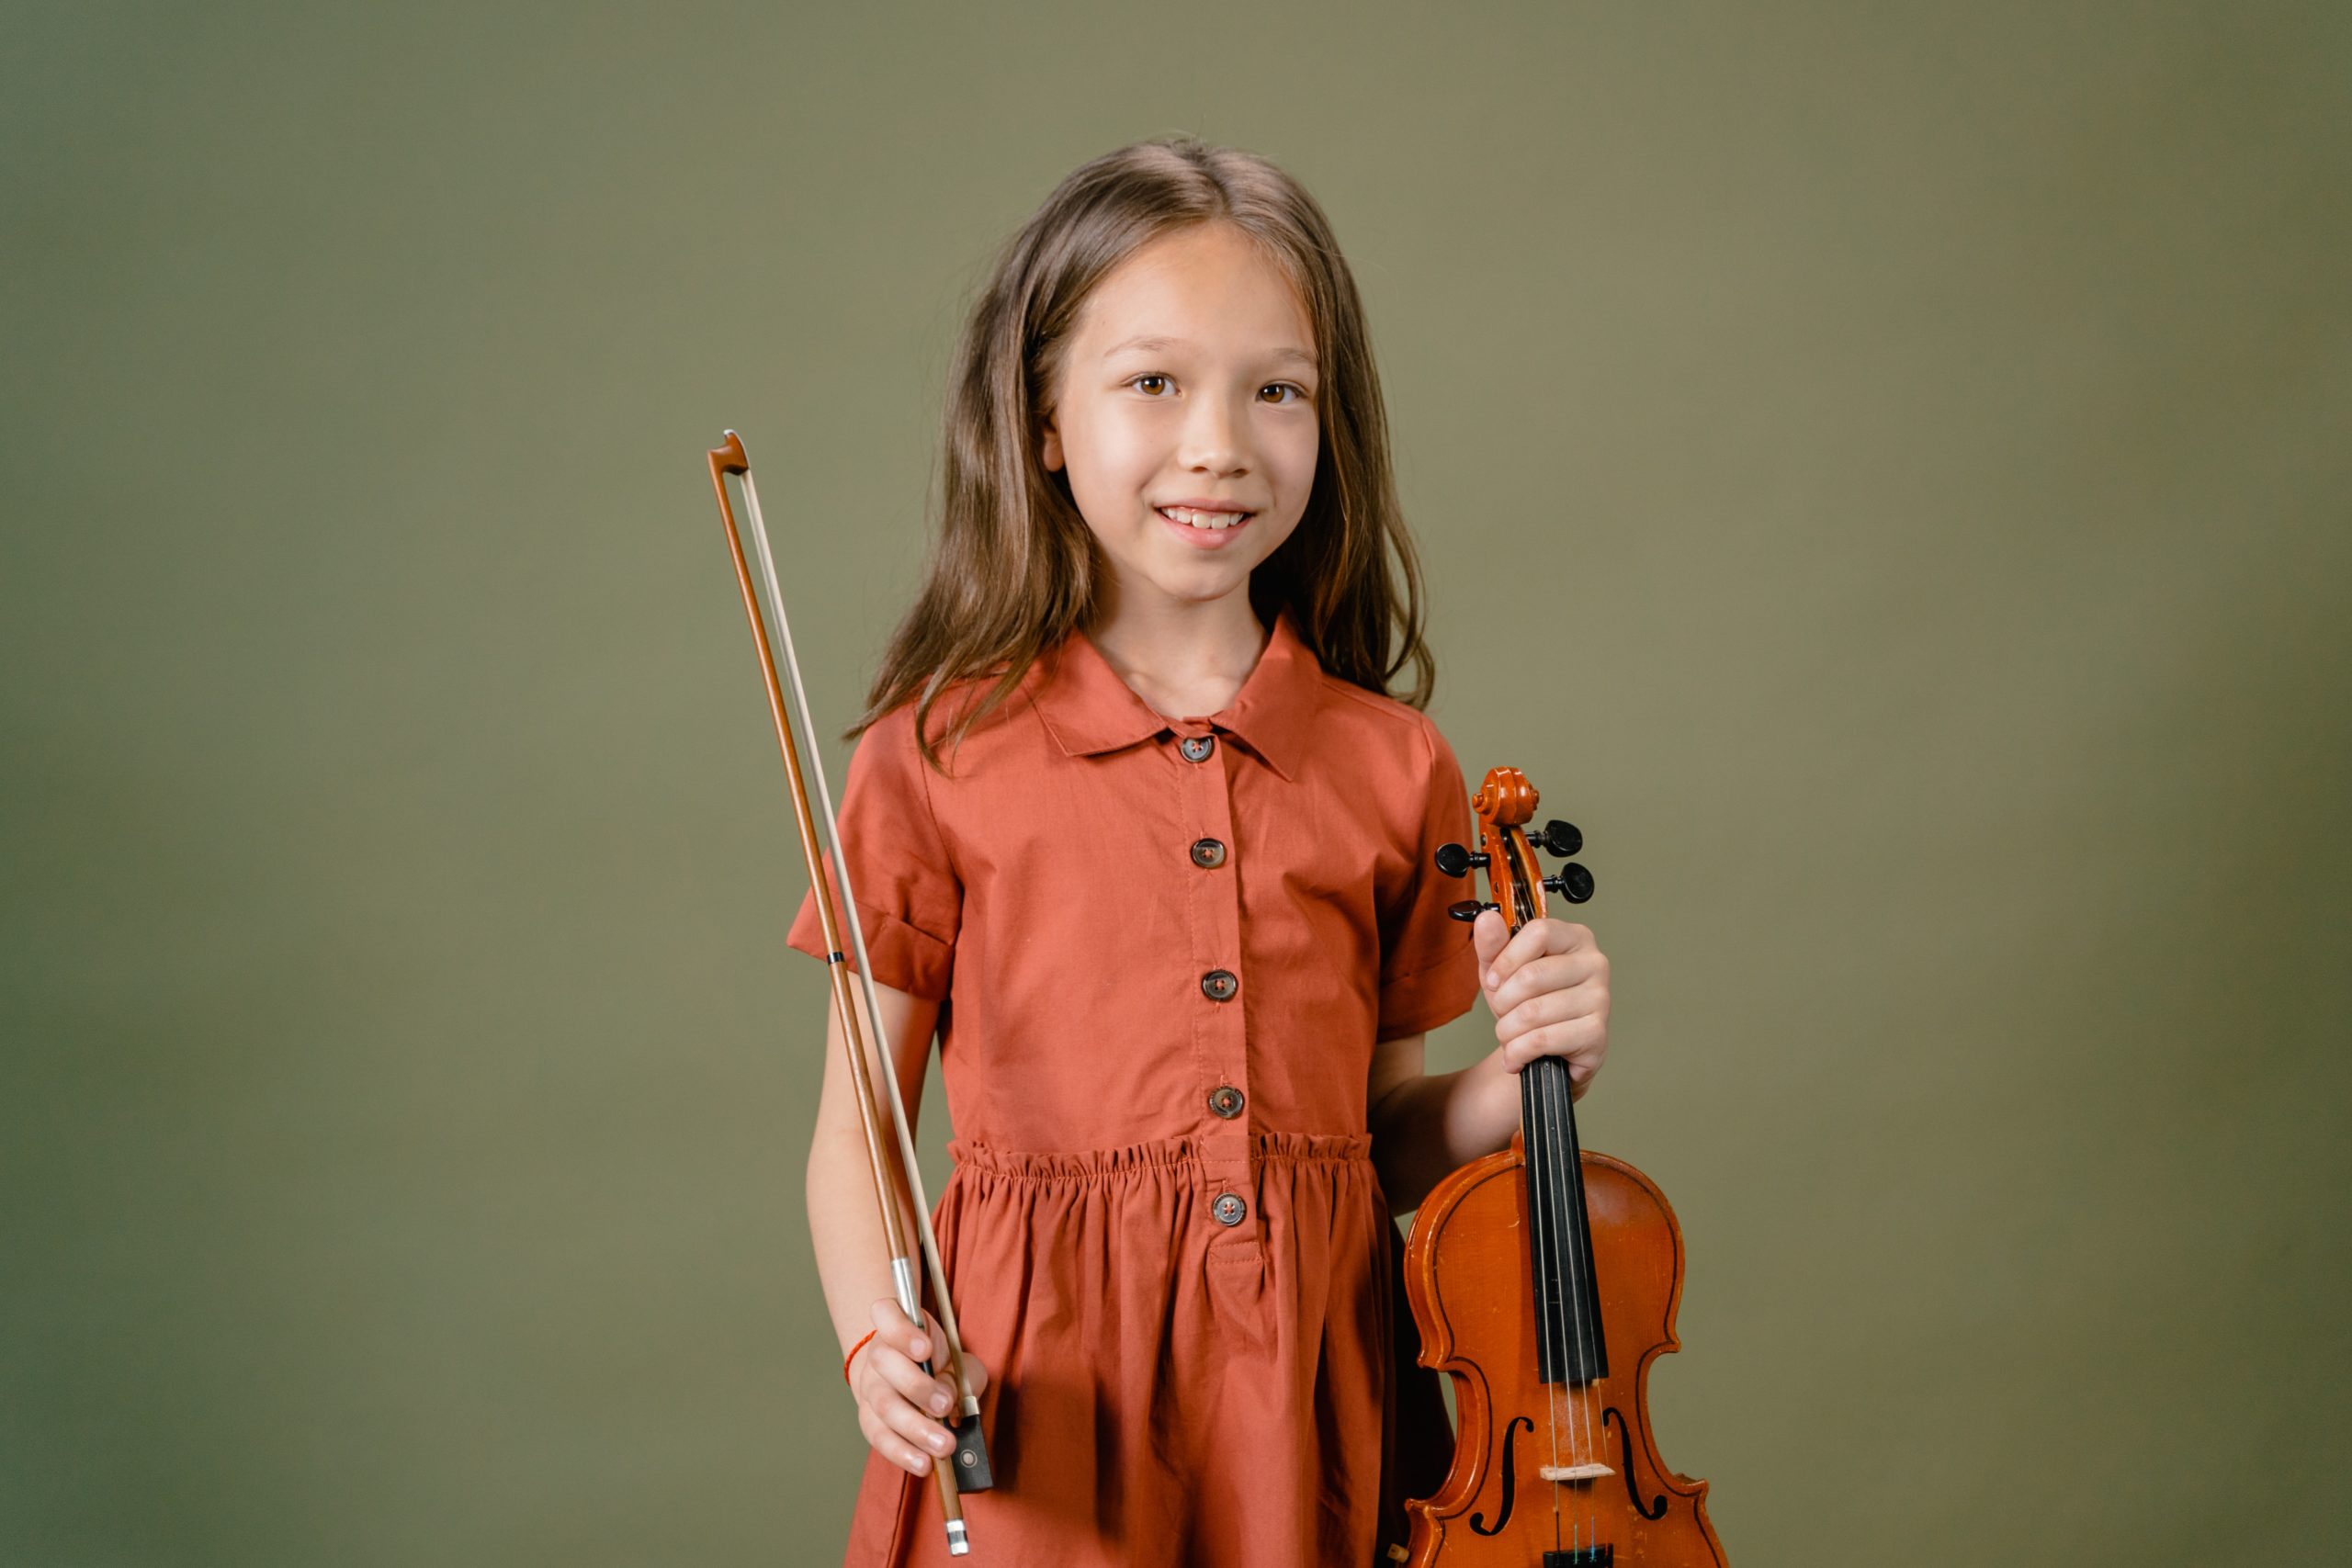 MUSIC LESSONS IN  FLOWER MOUND WE OFFER: PIANO, VIOLIN, VIOLA, CELLO LESSONS